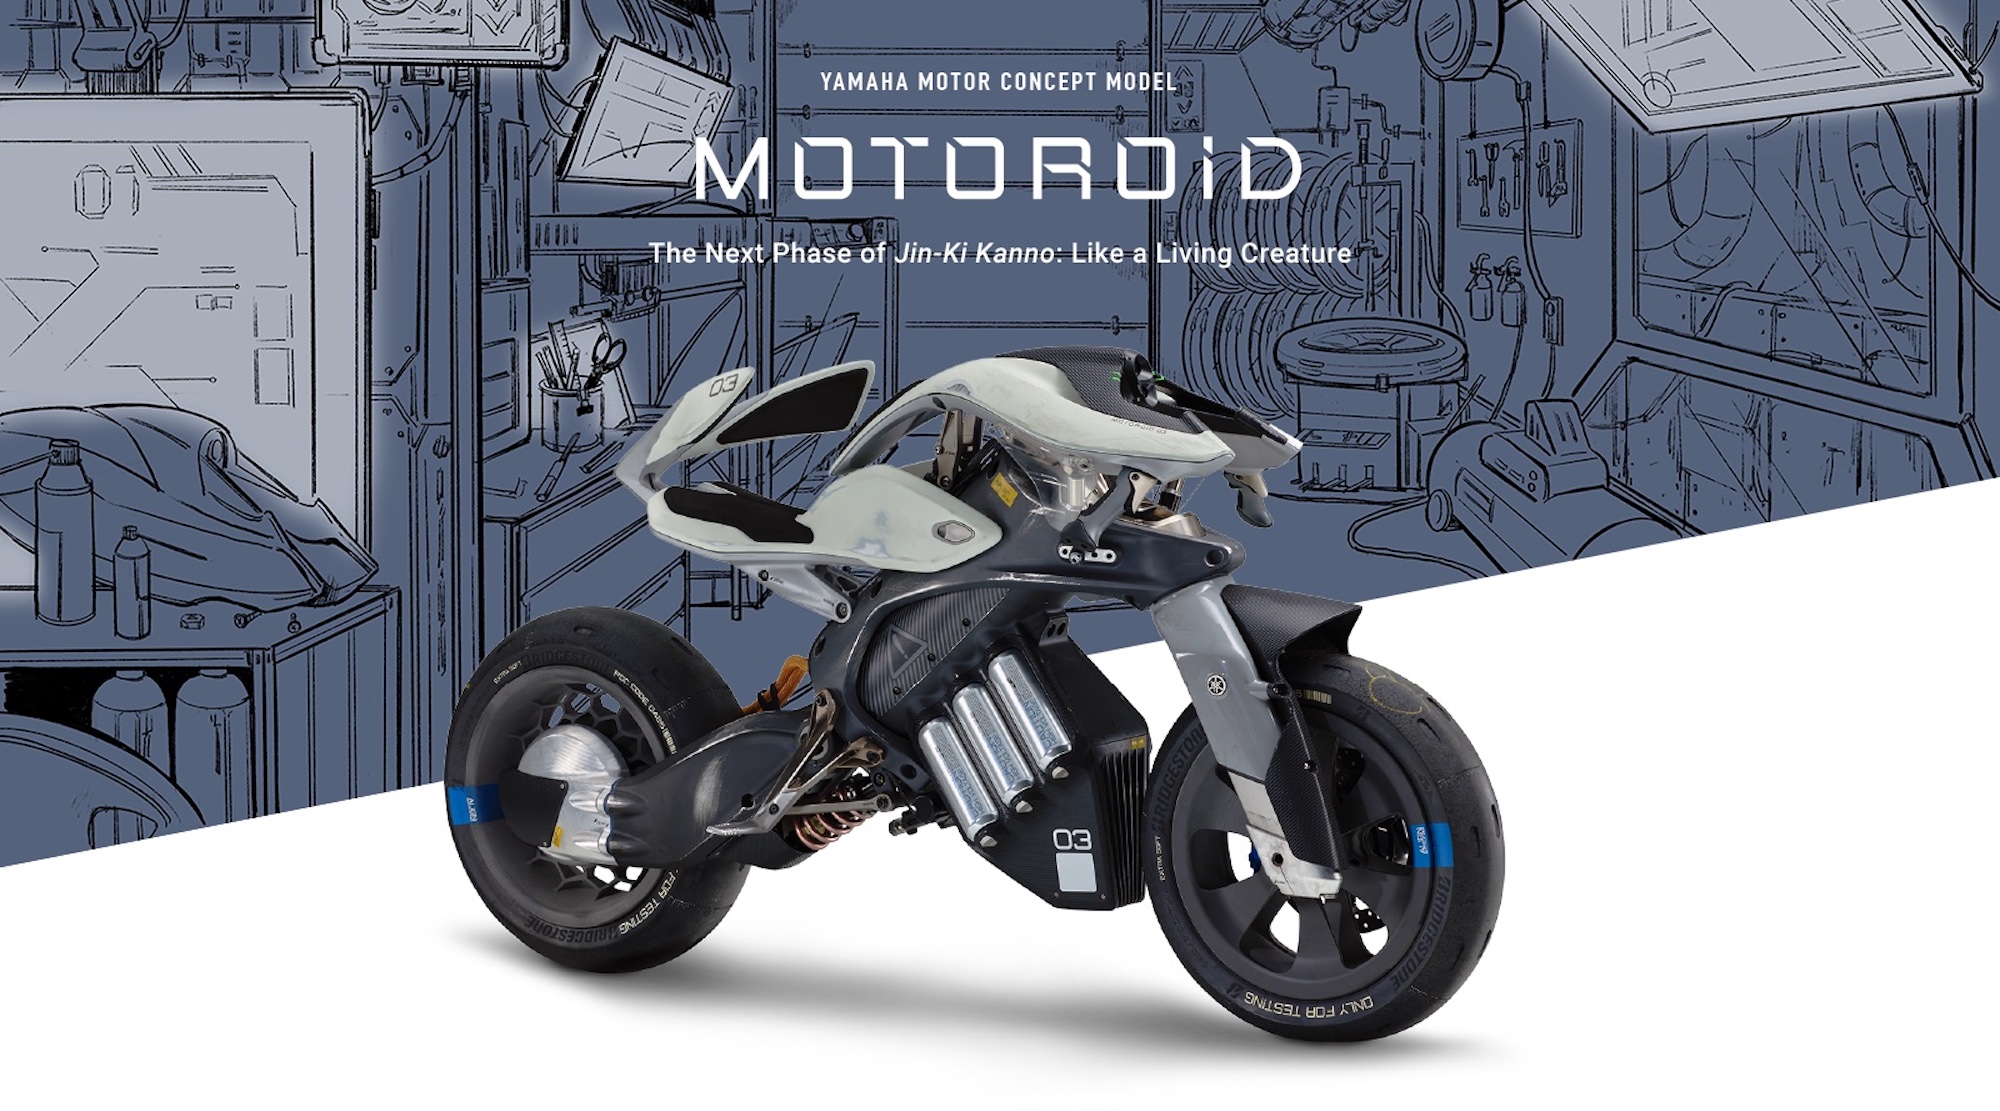 A view of Yamaha's concept bike, the MOTOROiD. Media sourced from Yamaha Motor Company.